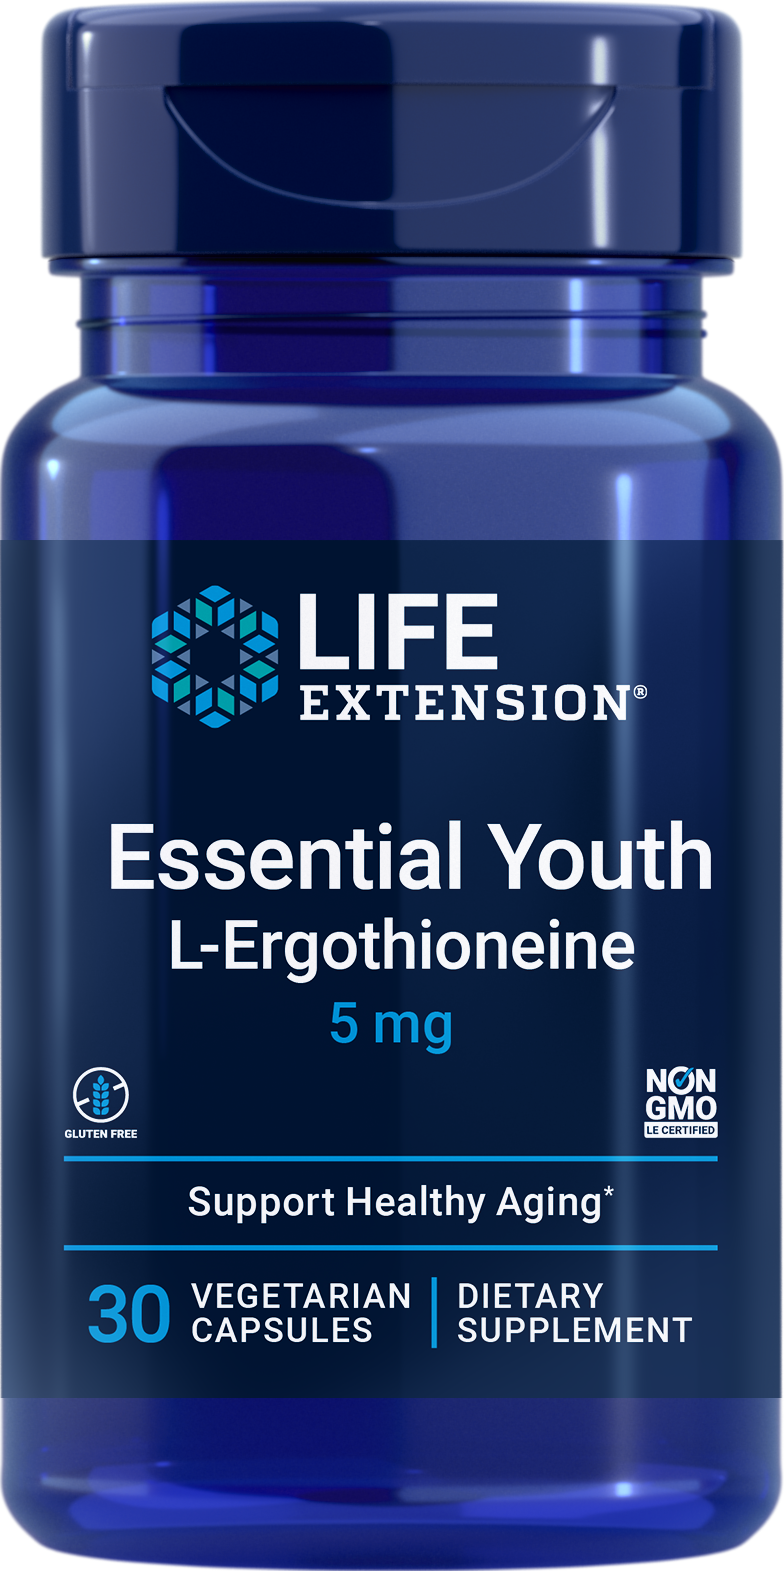 Life Extension Launches Essential Youth supplement providing L-Ergothioneine